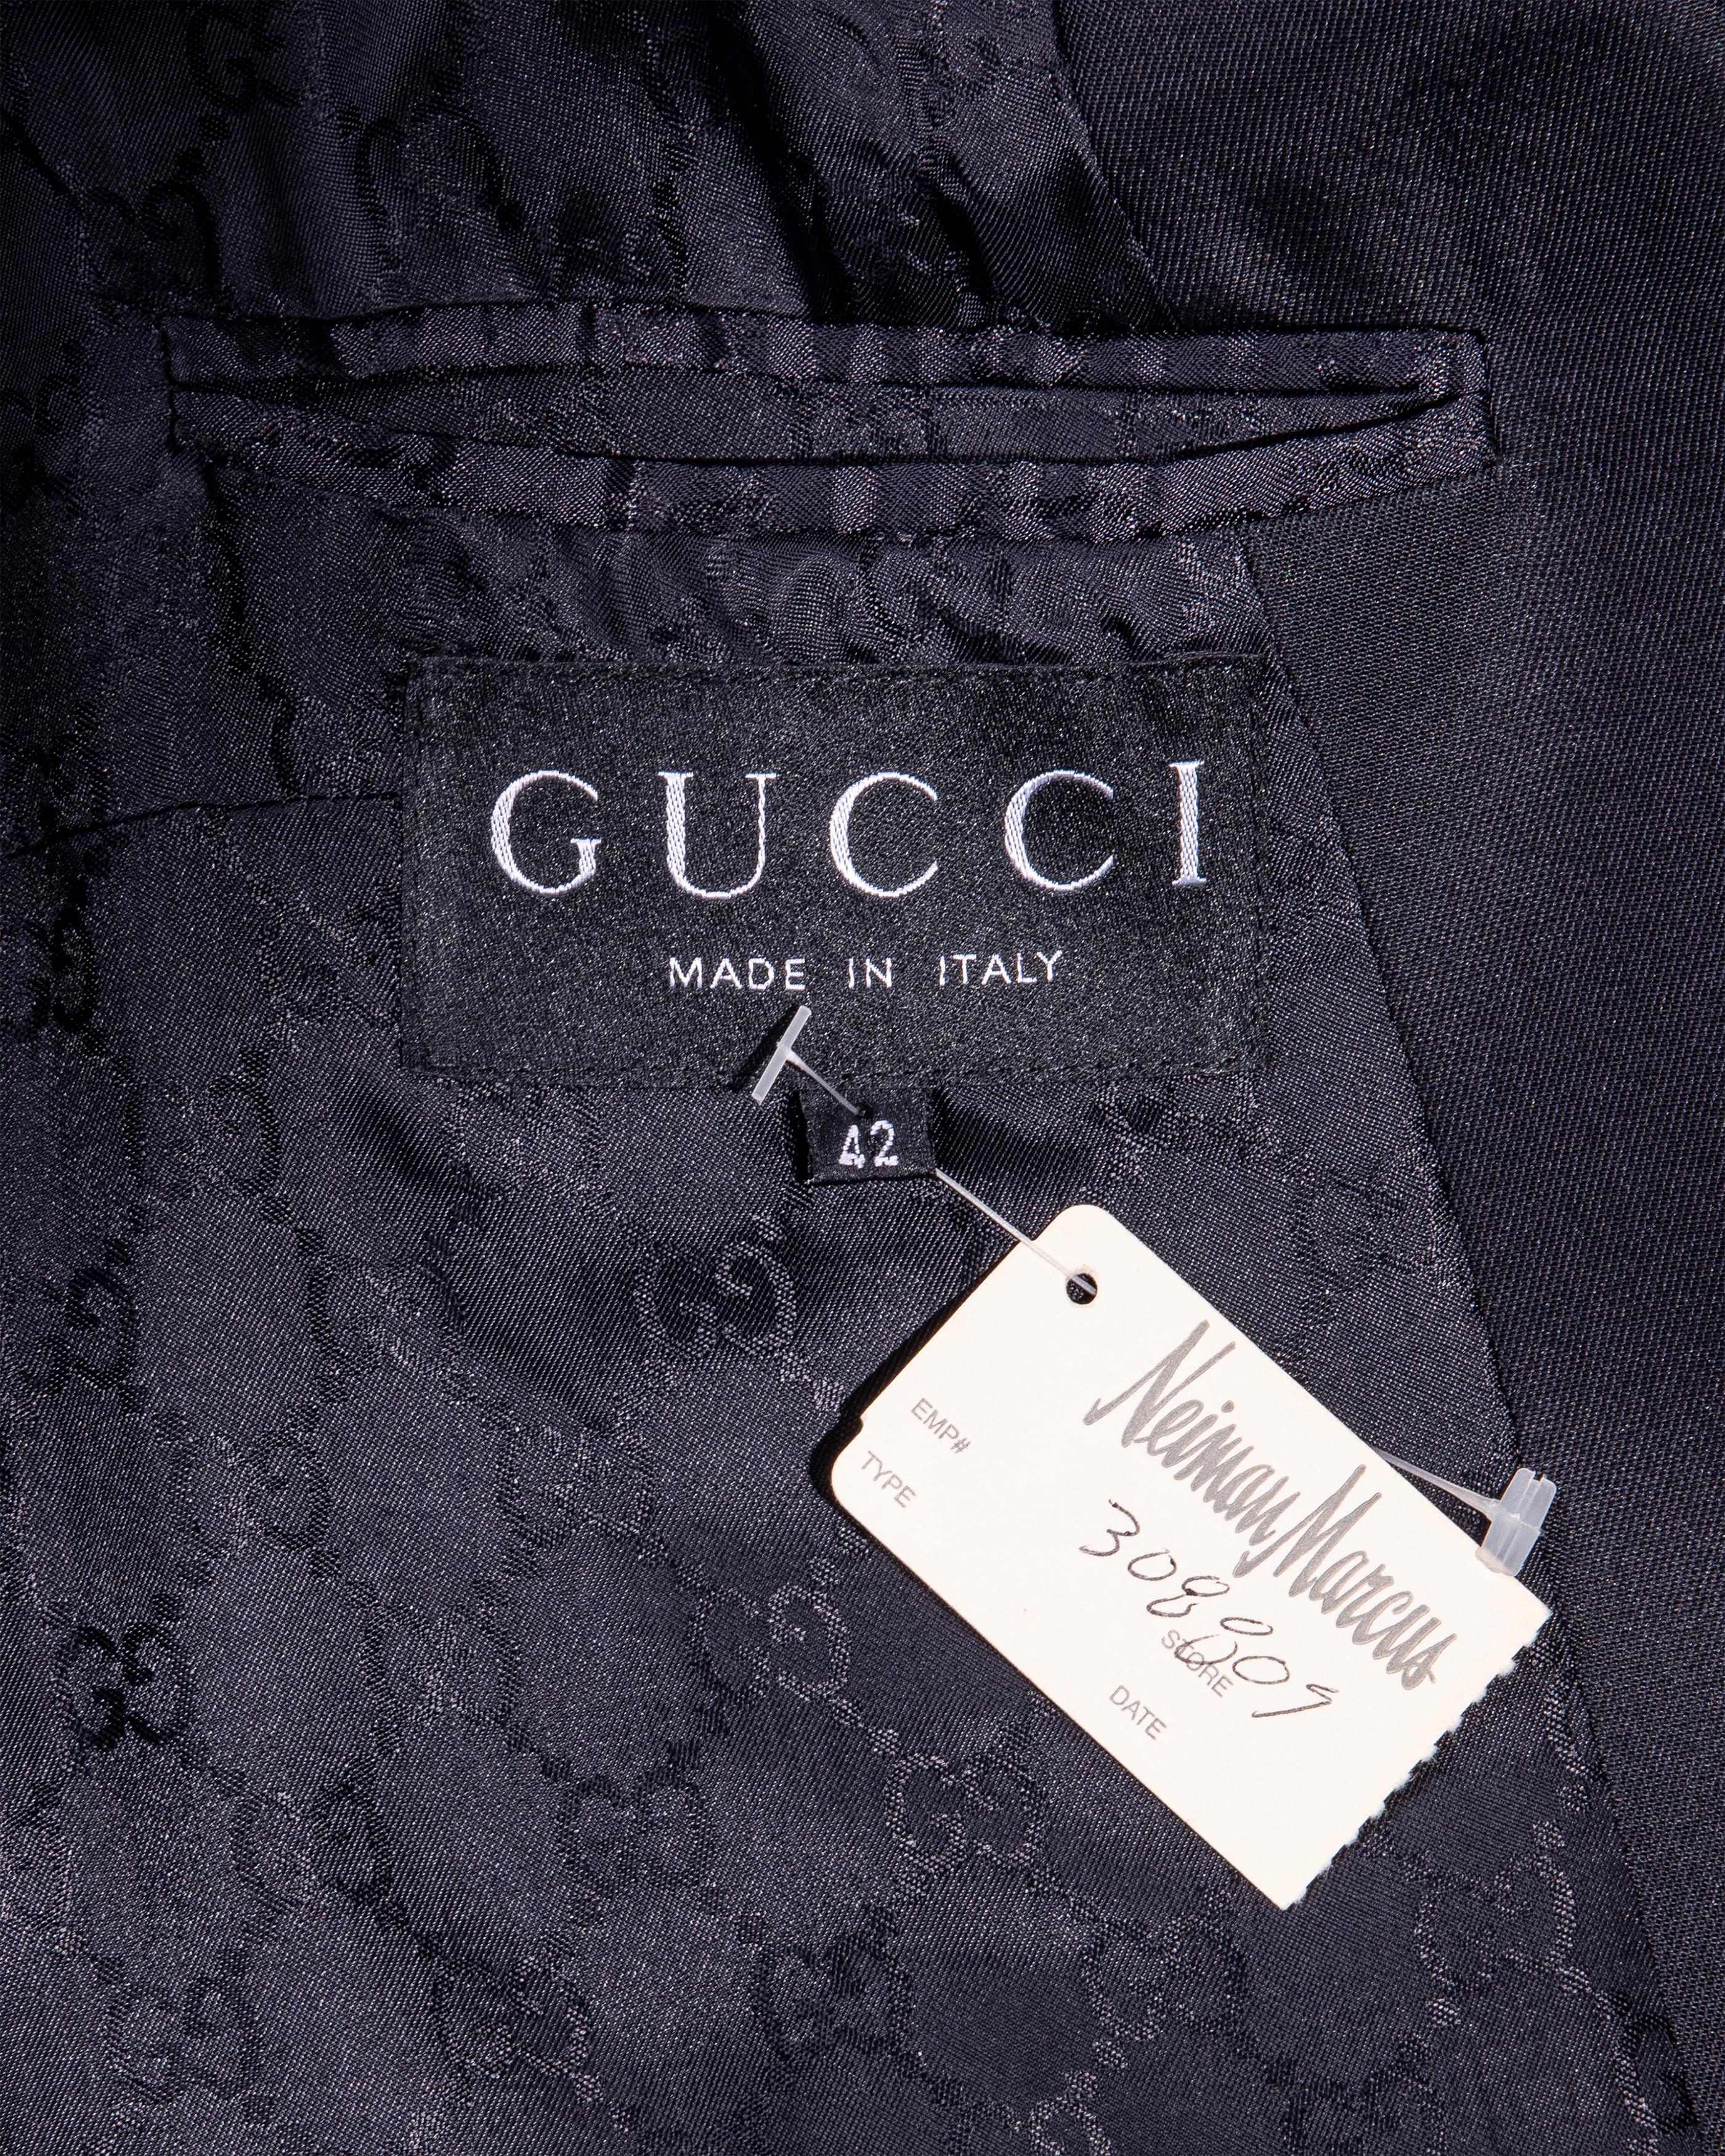 S/S 1998 Gucci by Tom Ford Black Silk Satin Jacket 7